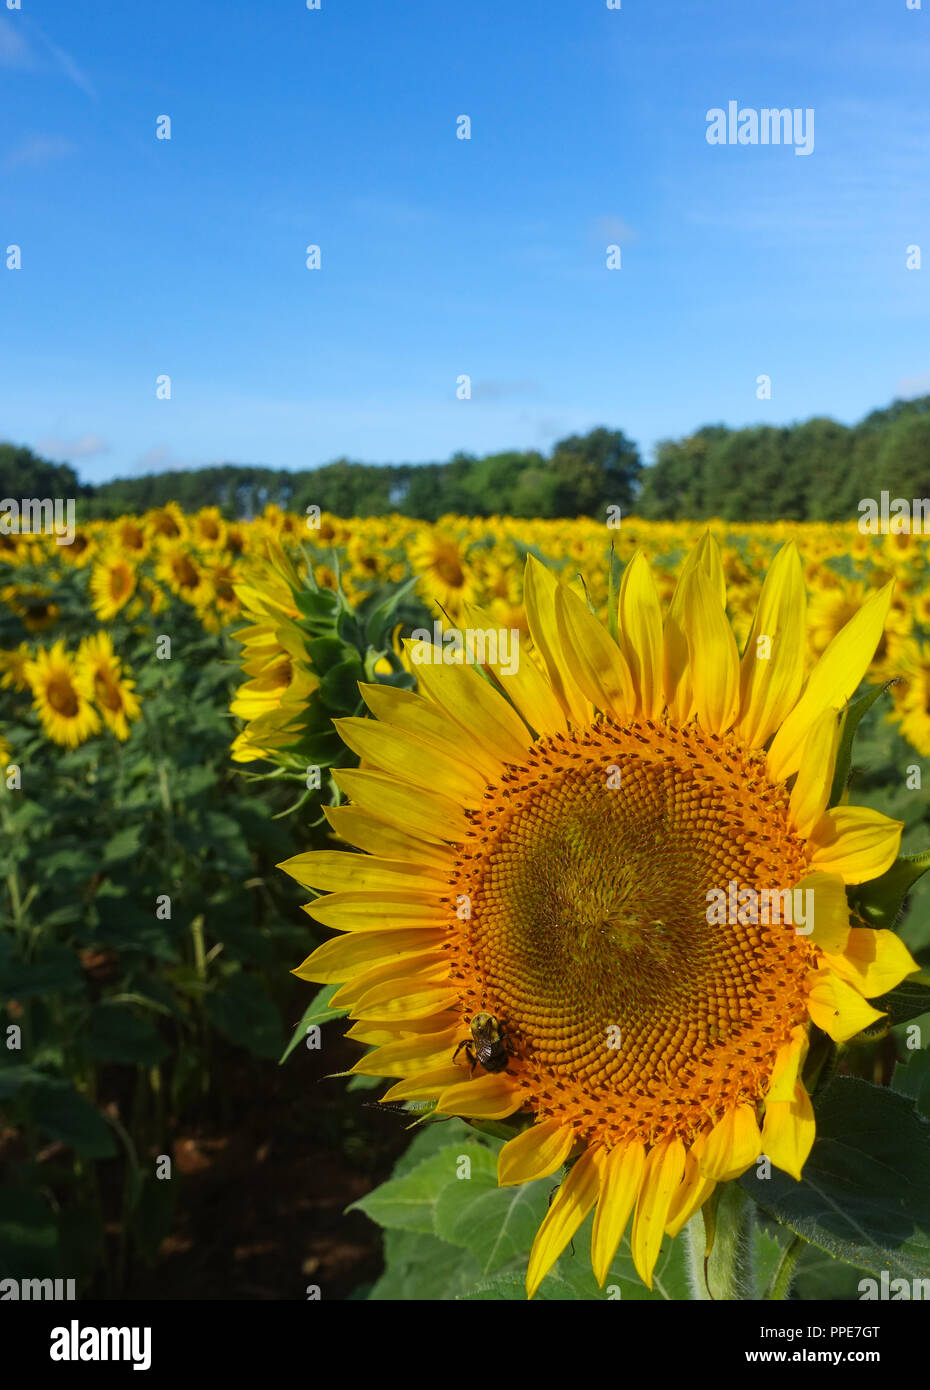 A bee lands on a sunflower and pollinates it in a sunflower field underneath a blue sky in summer Stock Photo